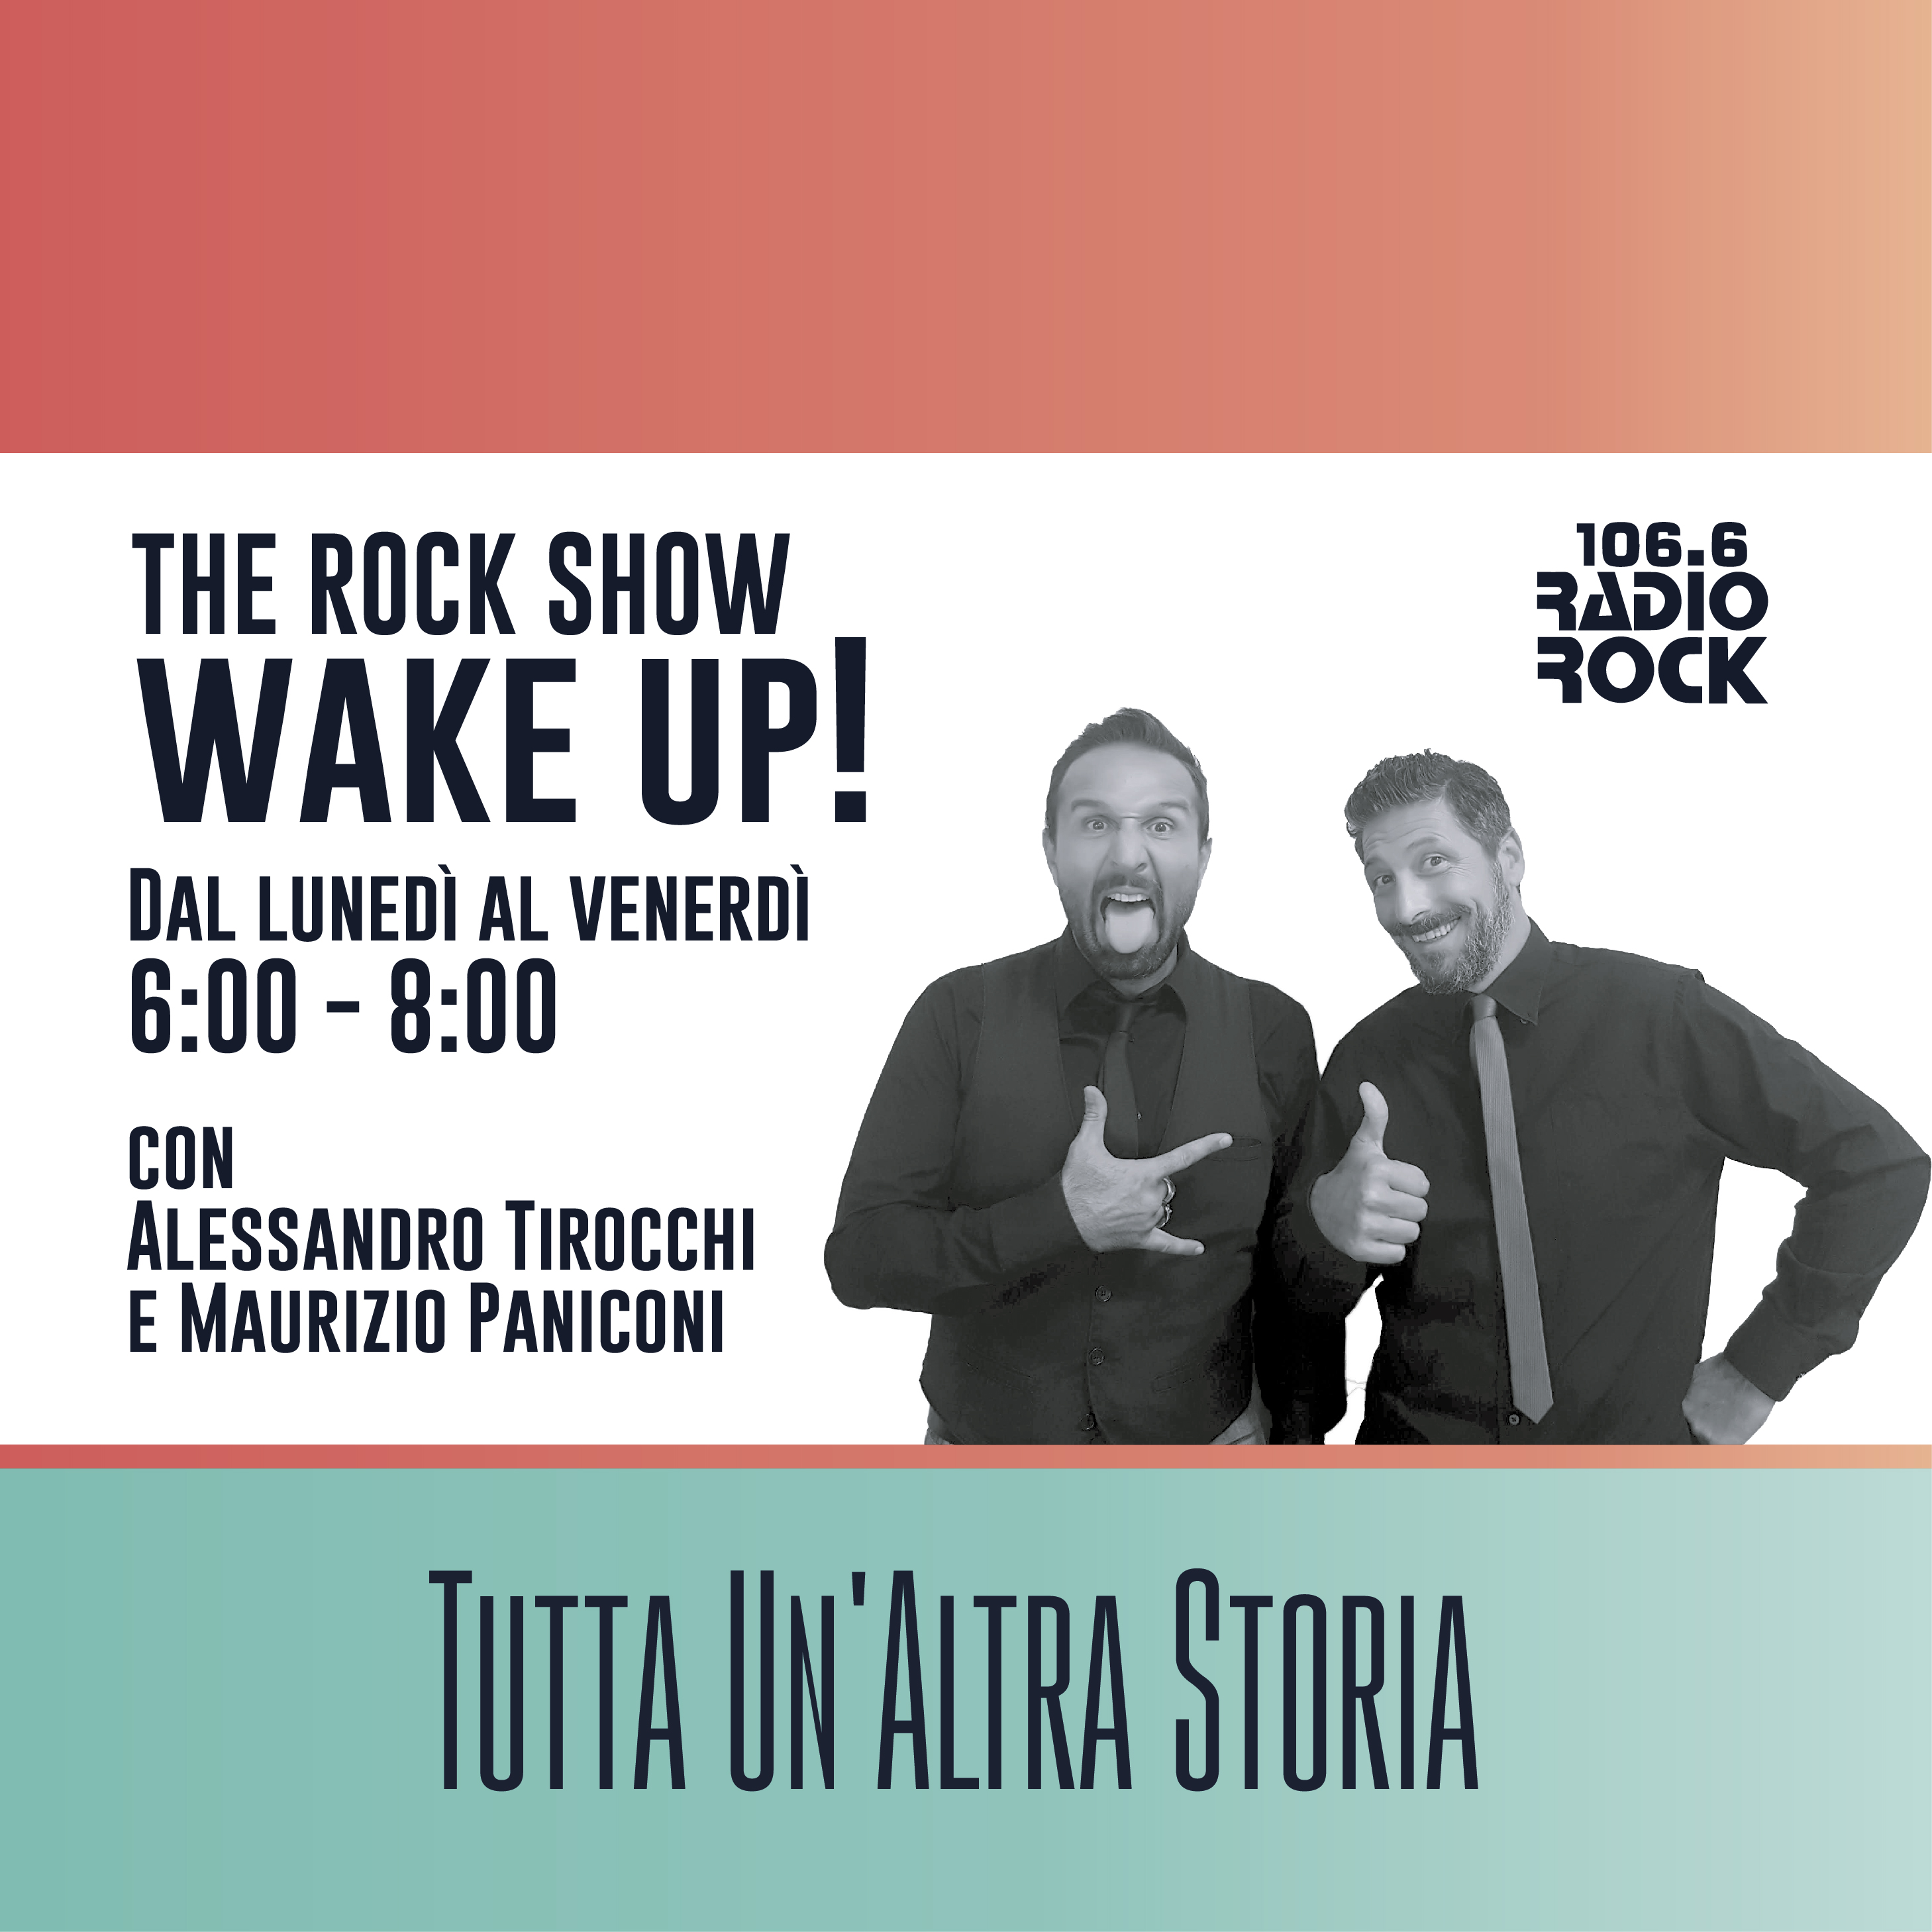 The Rock Show: Wake Up! (15-04-21)